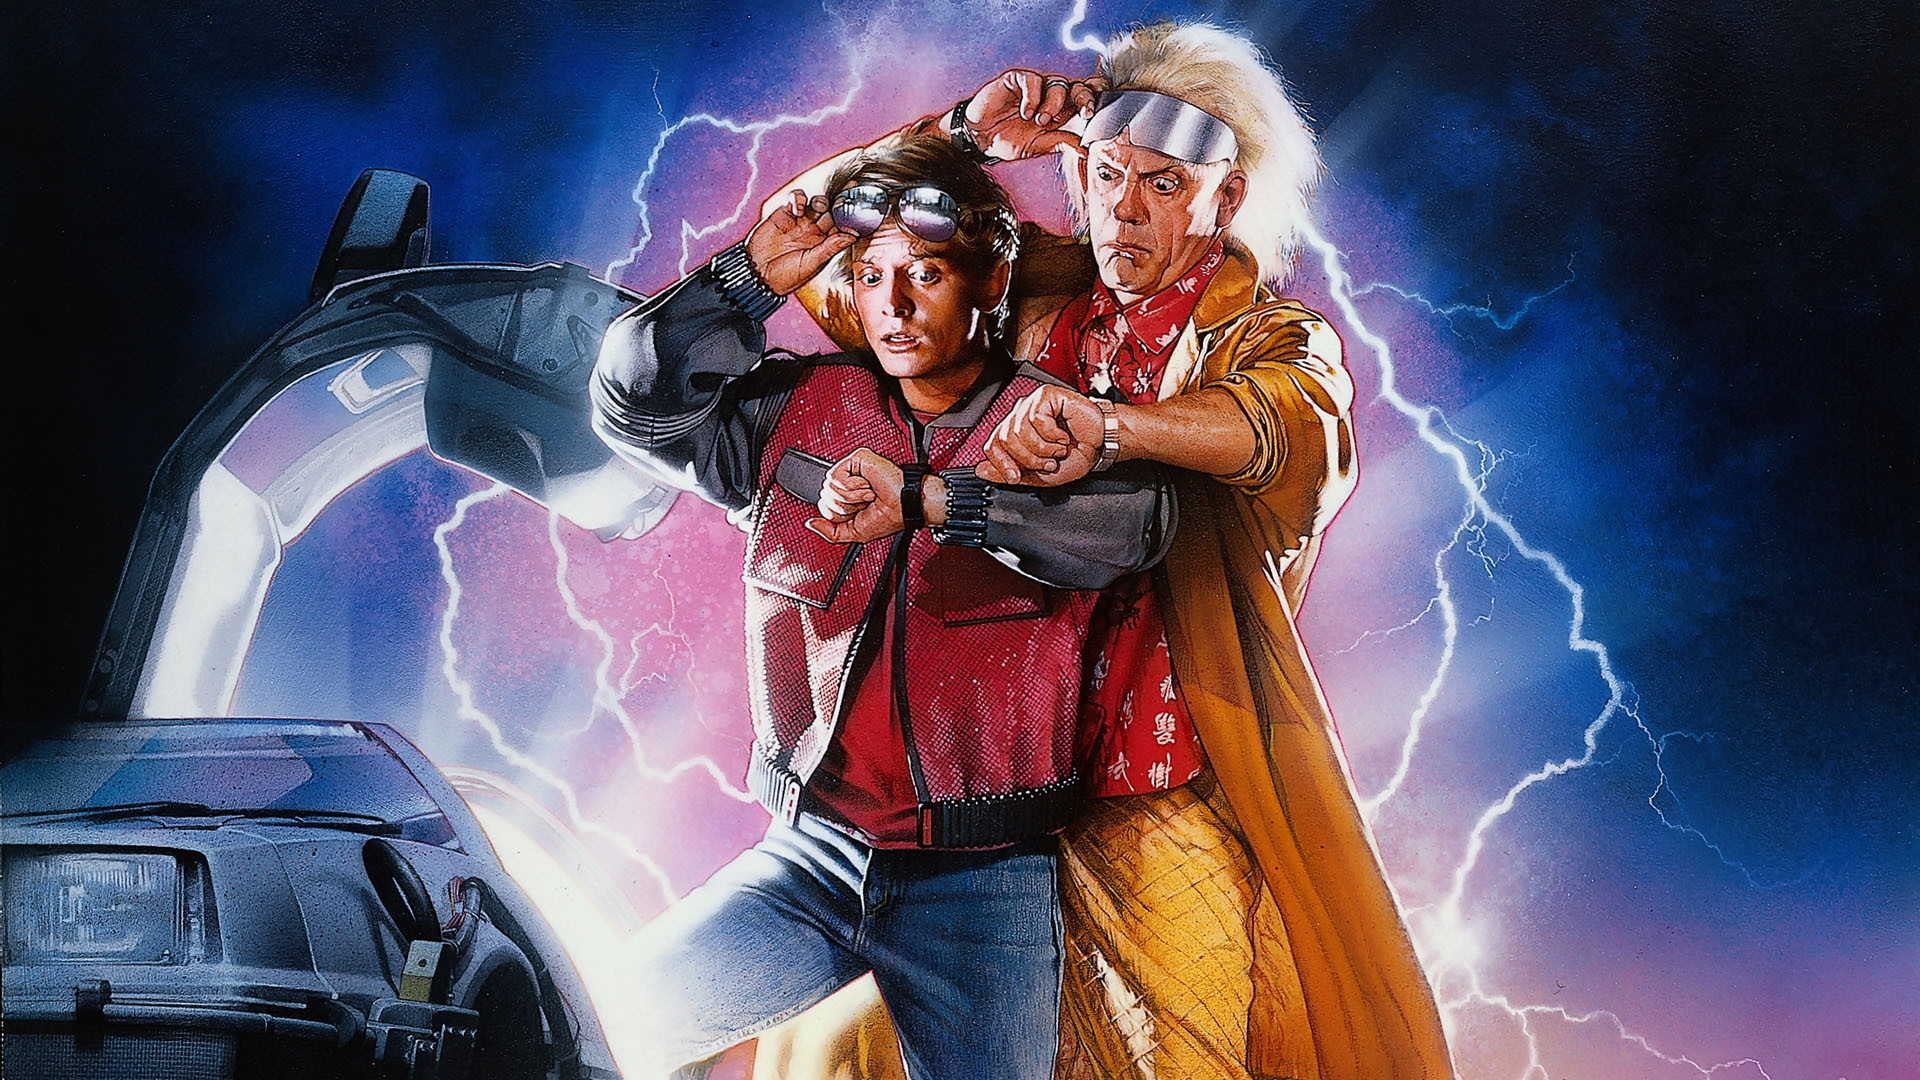 Full HD 1080p Back to the future Wallpapers HD, Desktop